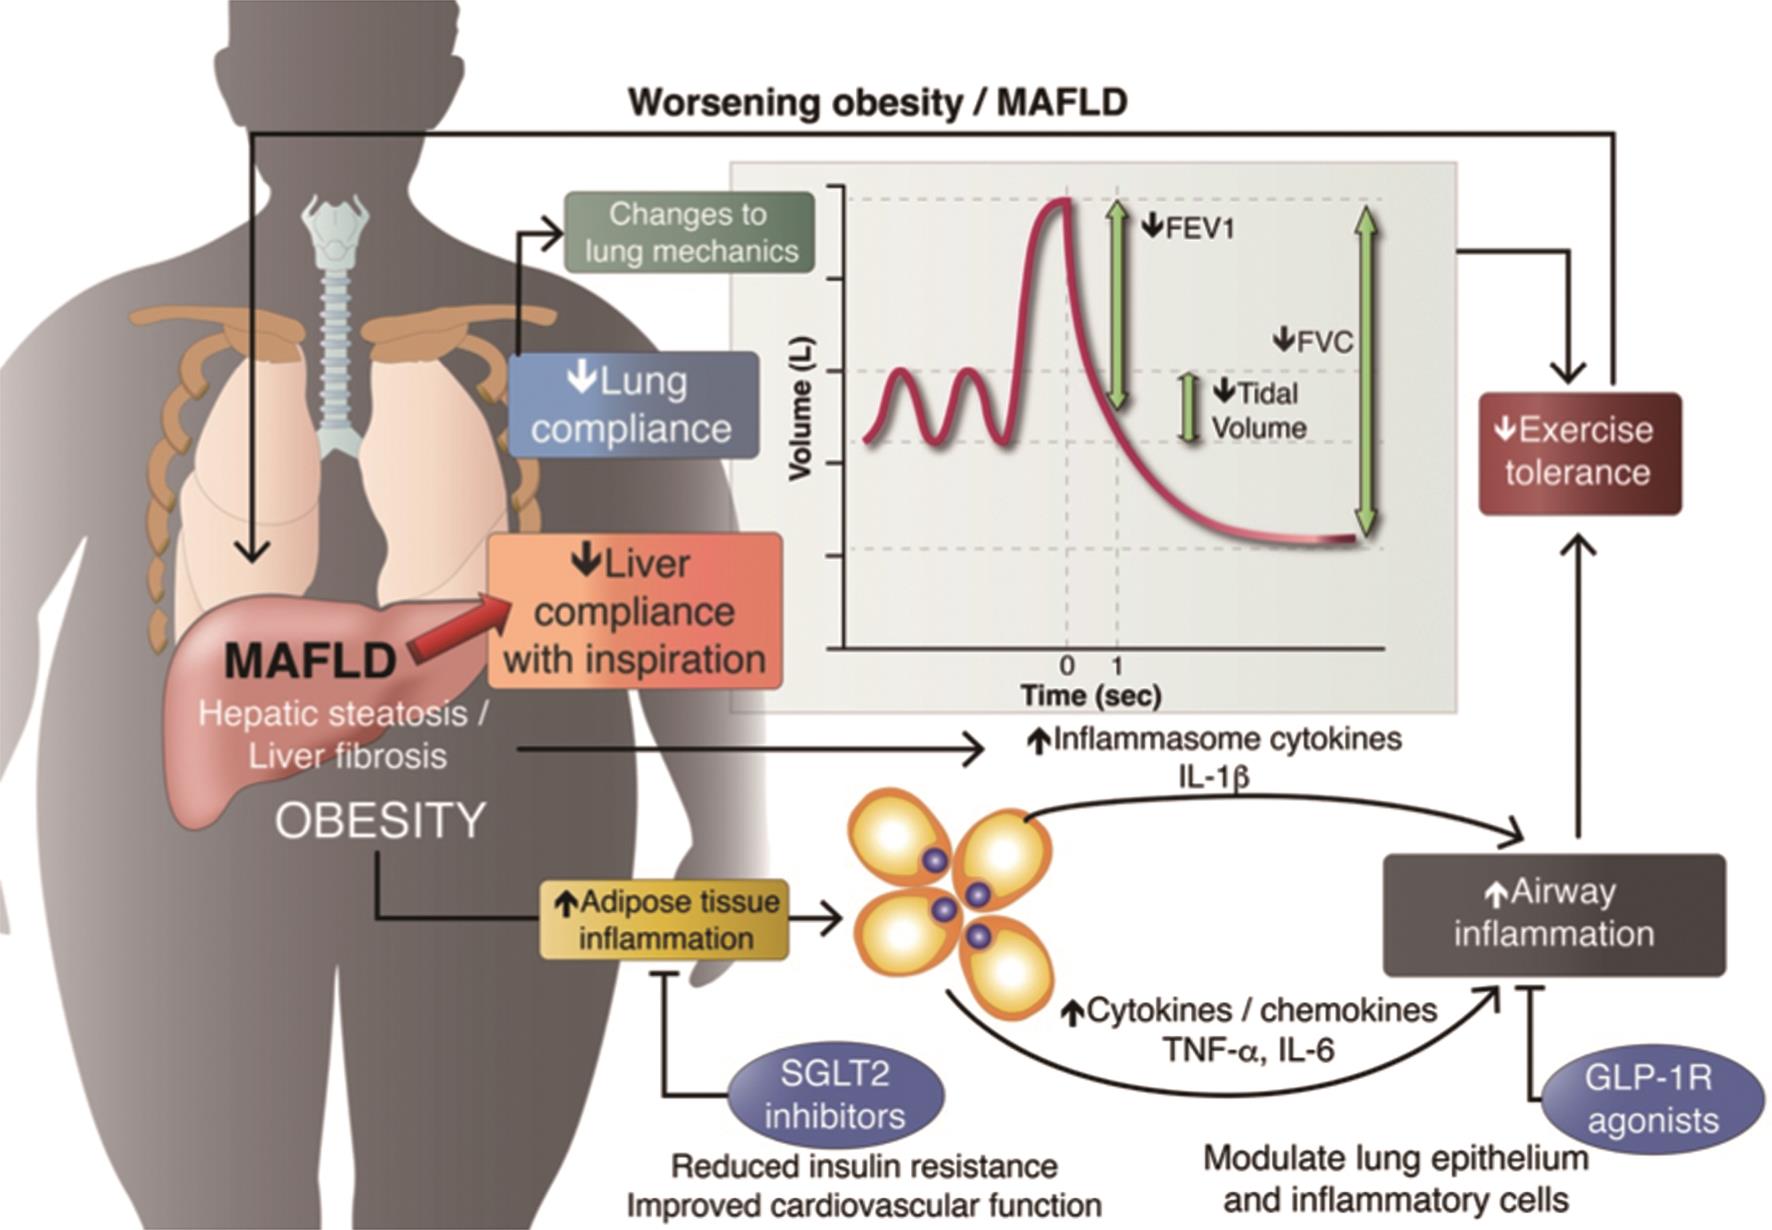 Effects of metabolic-associated liver disease (MAFLD), obesity, and liver fibrosis on respiratory function and current therapeutic options.